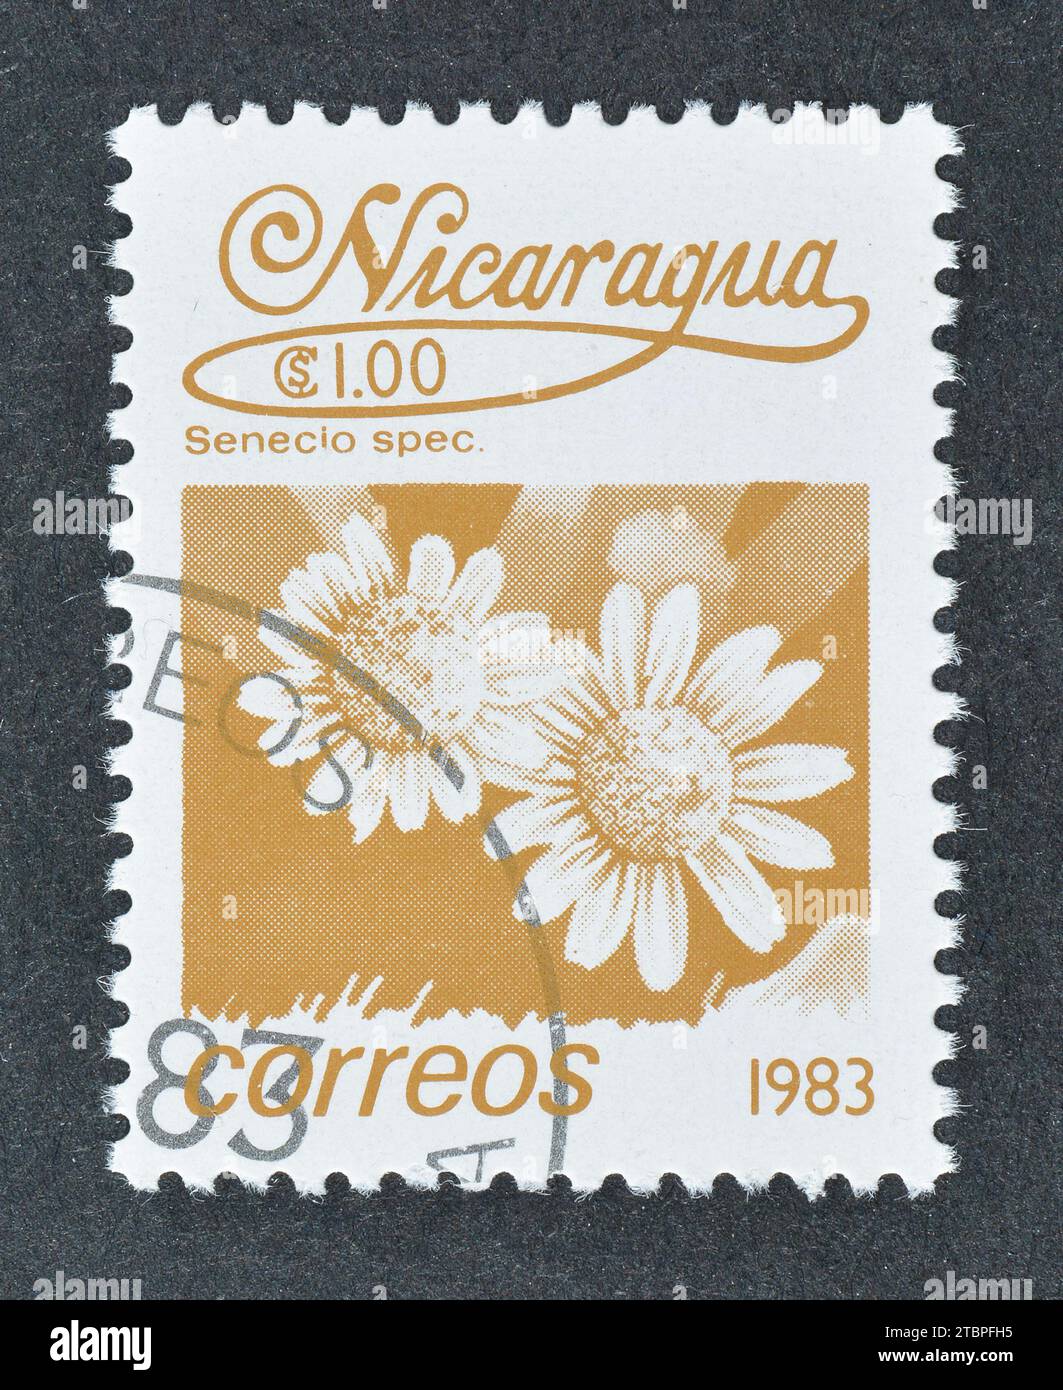 Cancelled postage stamp printed by Nicaragua, that shows Senecio sp., circa 1983. Stock Photo